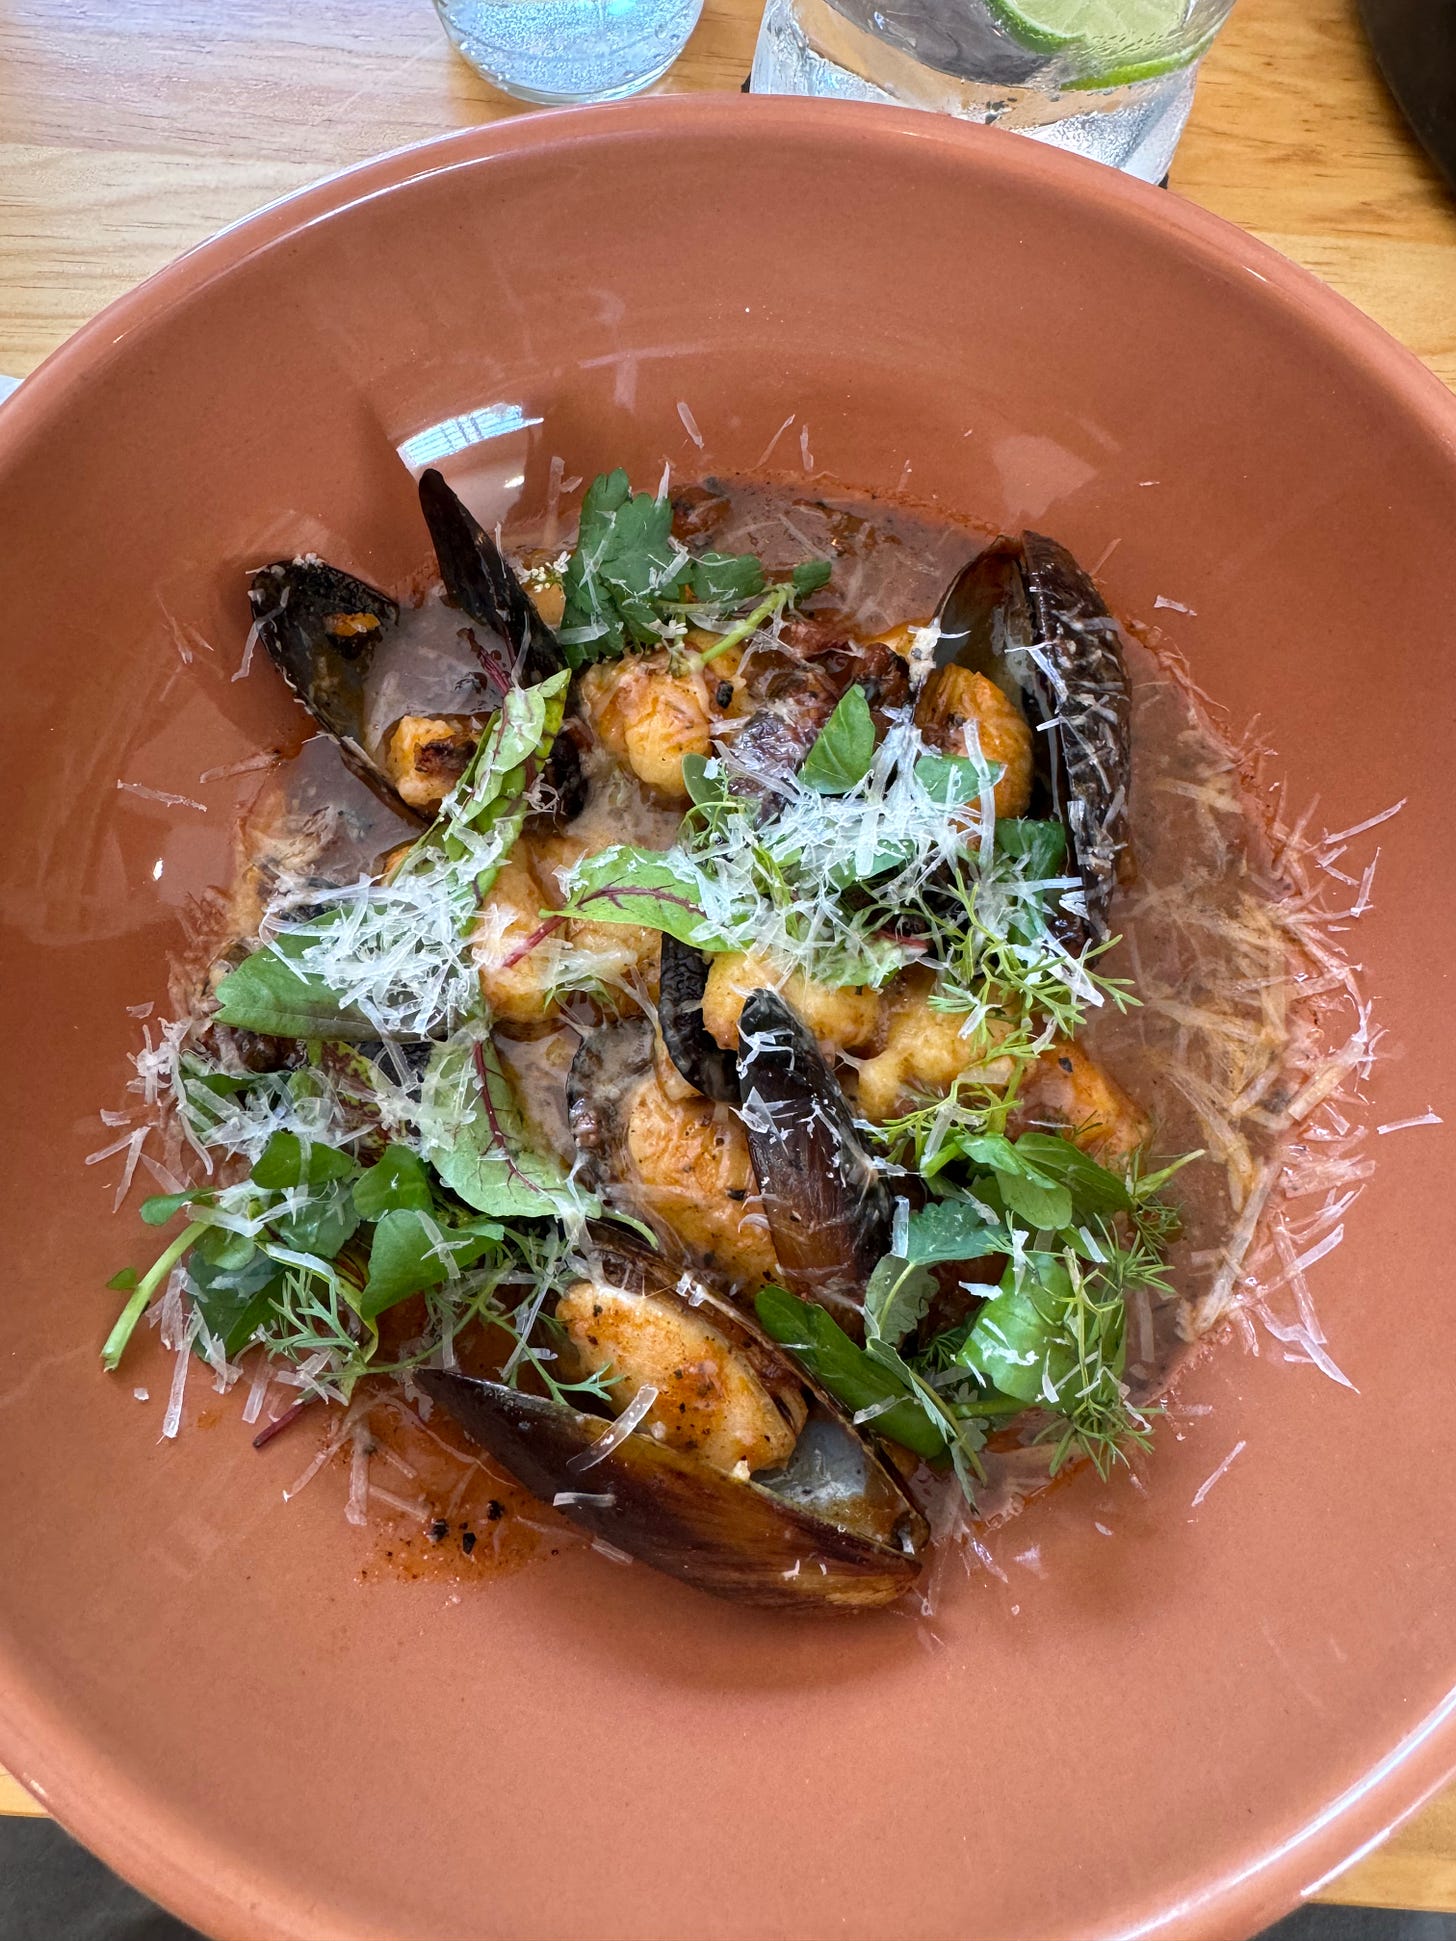 Gnocchi with greens and mussels in a round bowl.